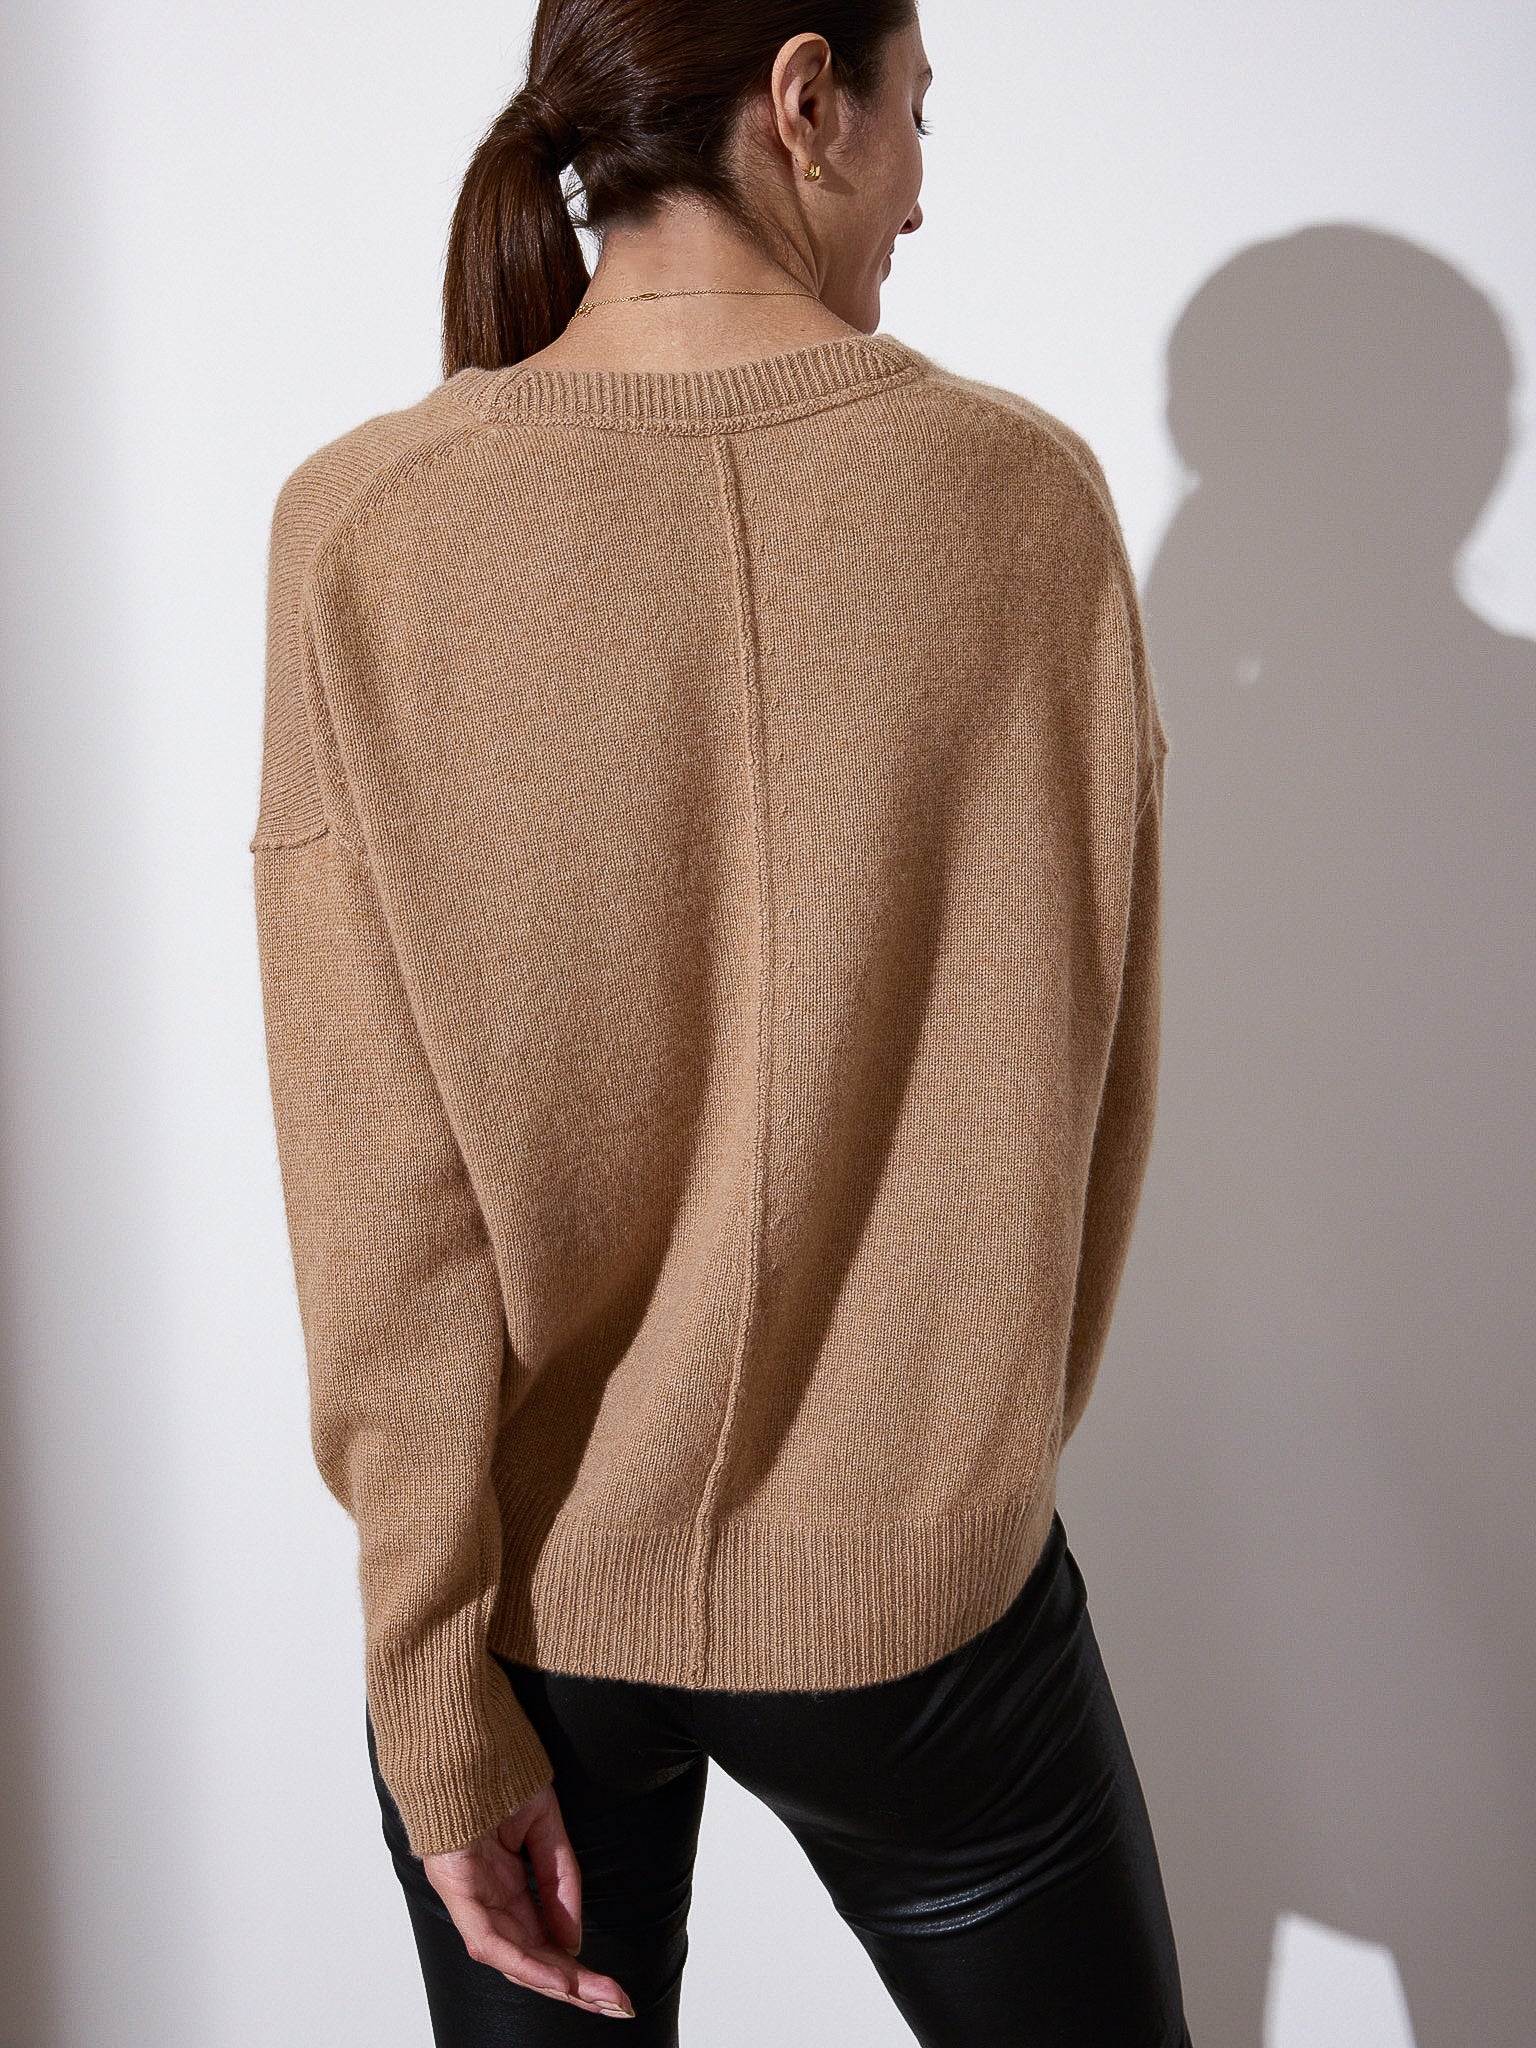 Everyday cashmere crewneck tan sweater back view